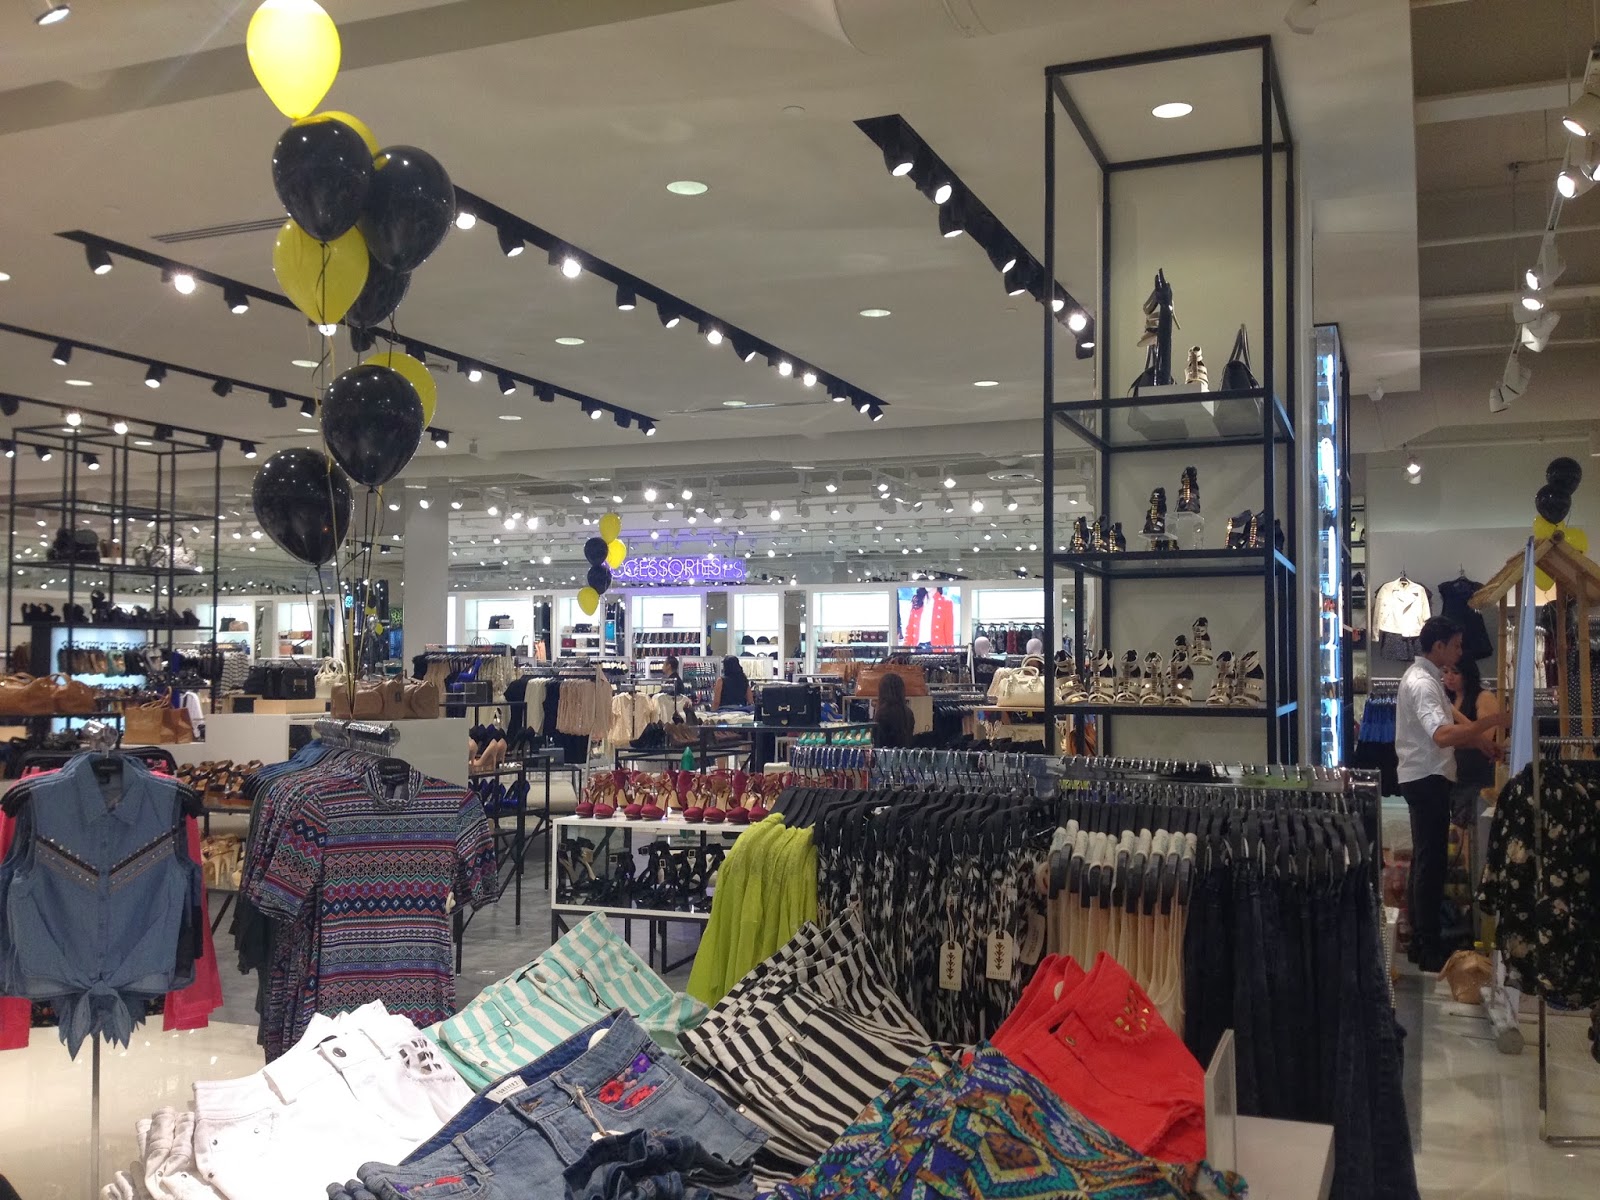 One Thousand Looks: FOREVER 21 EL SALVADOR PRE-OPENING